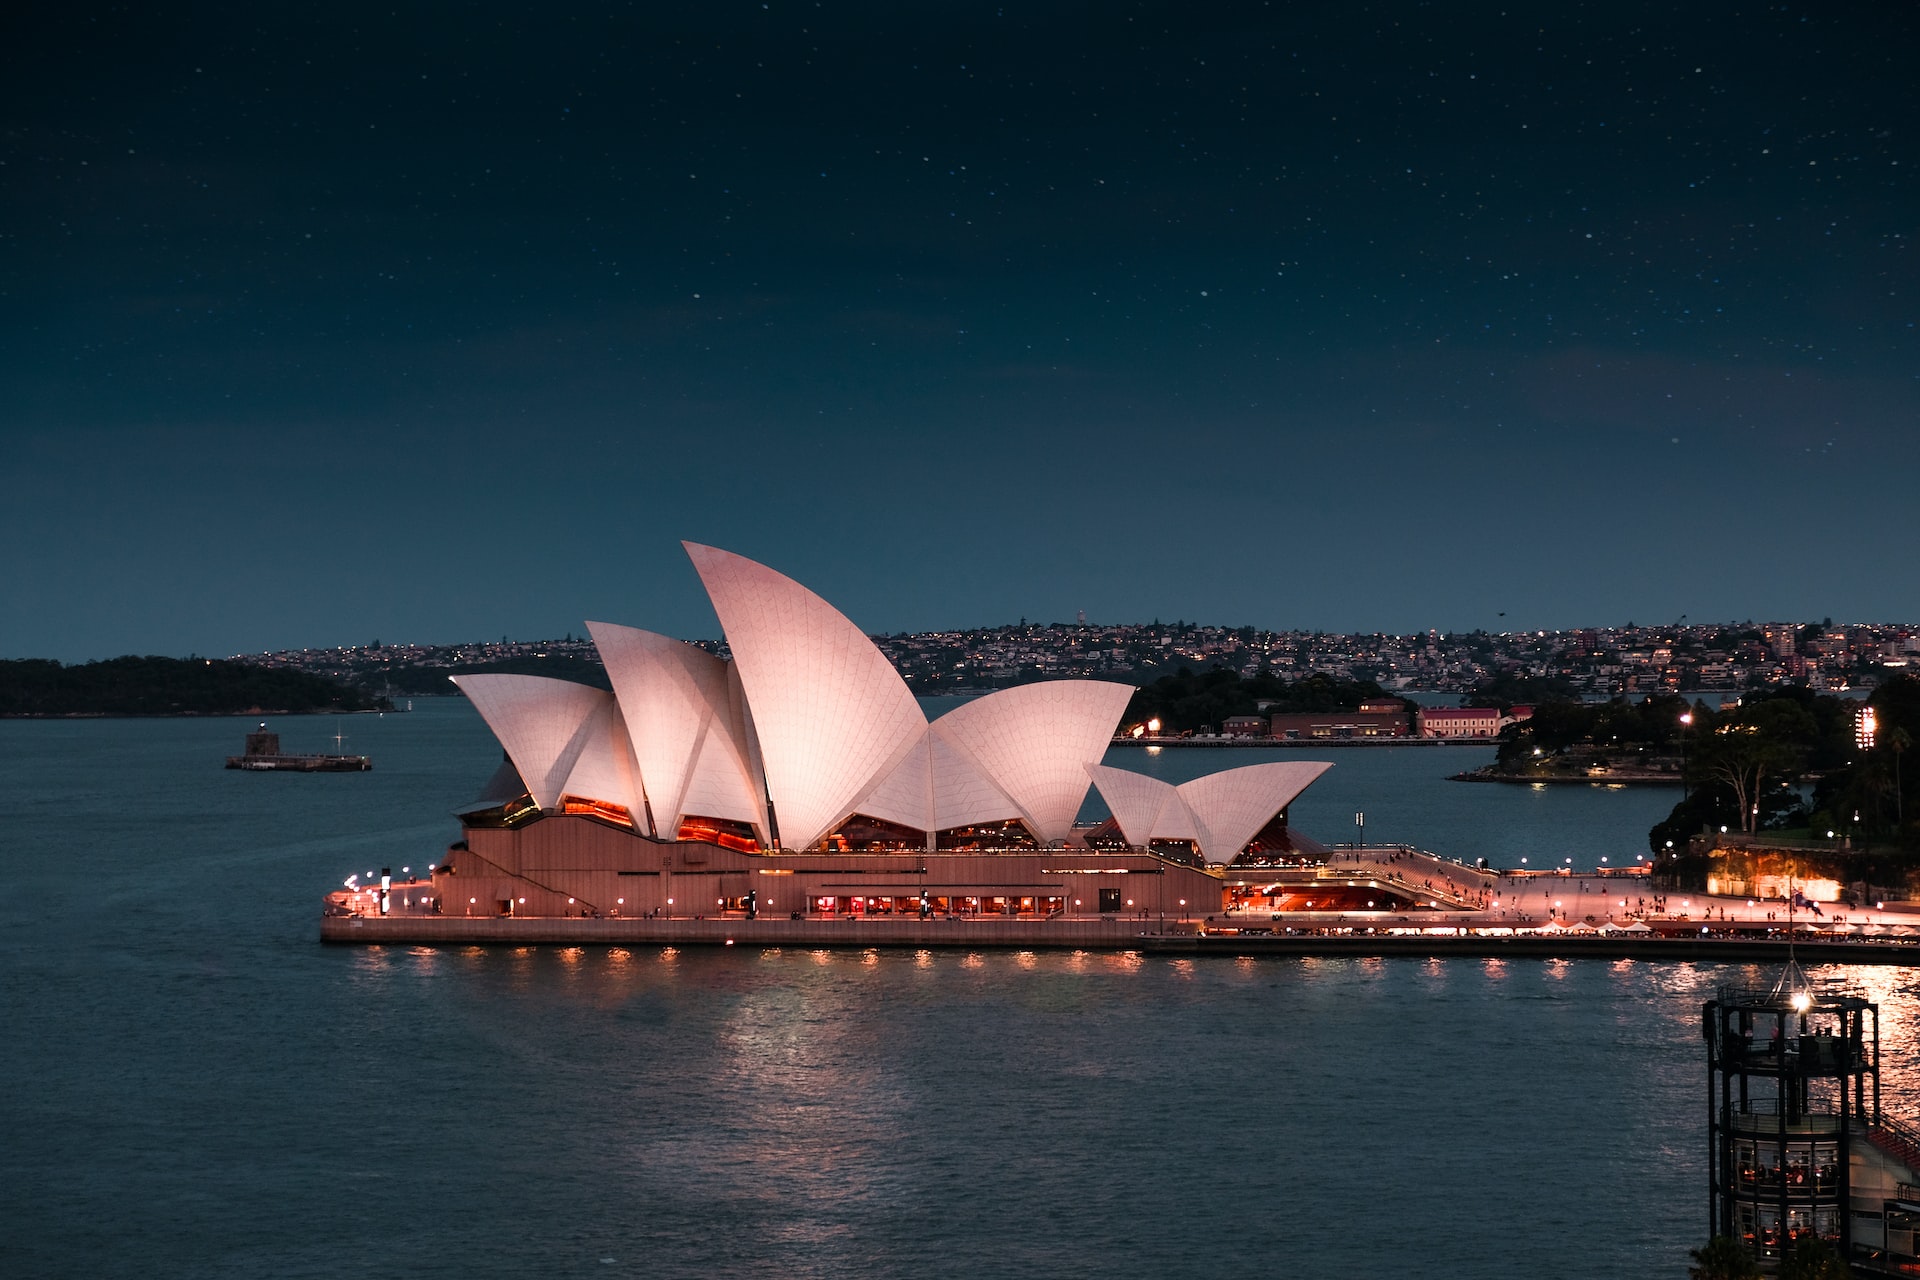 An image of the Sydney Opera House, lit up at night.